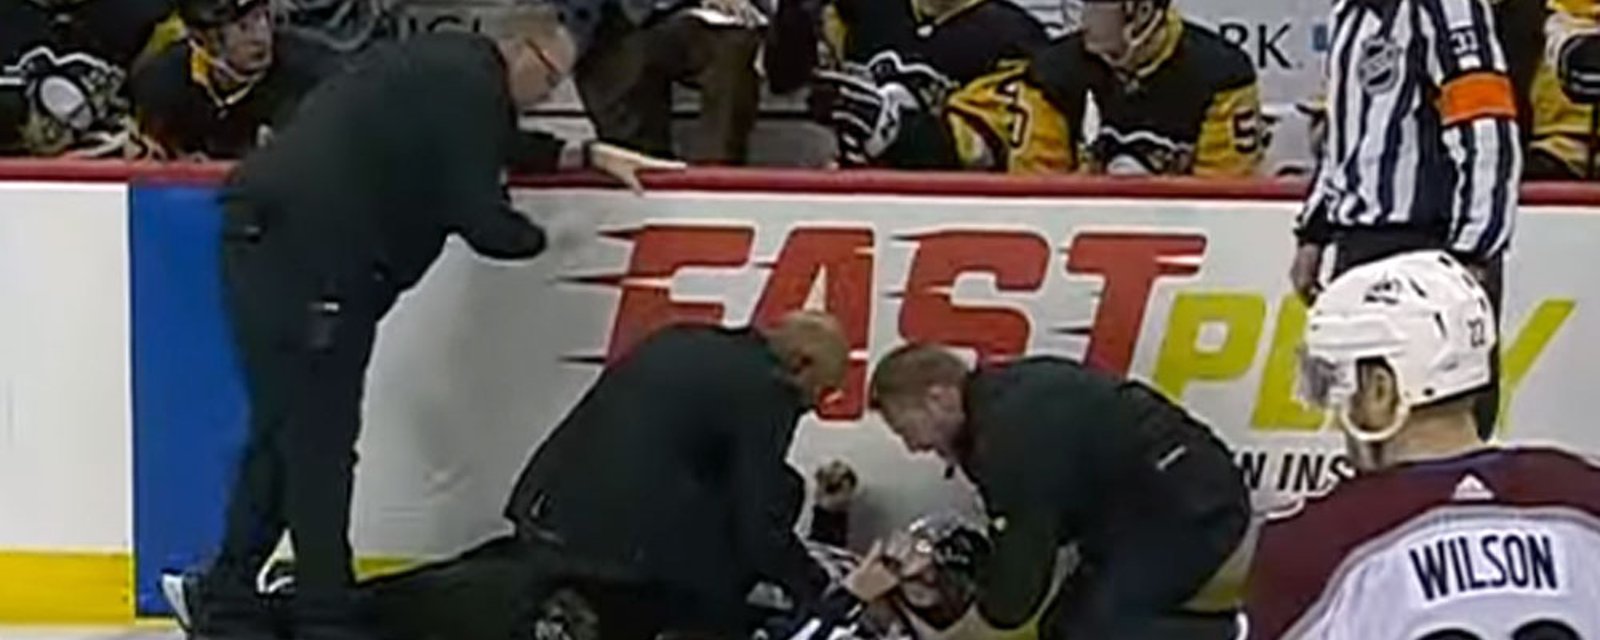 Referee slams his head into the boards and is forced to leave Pens vs Avs game